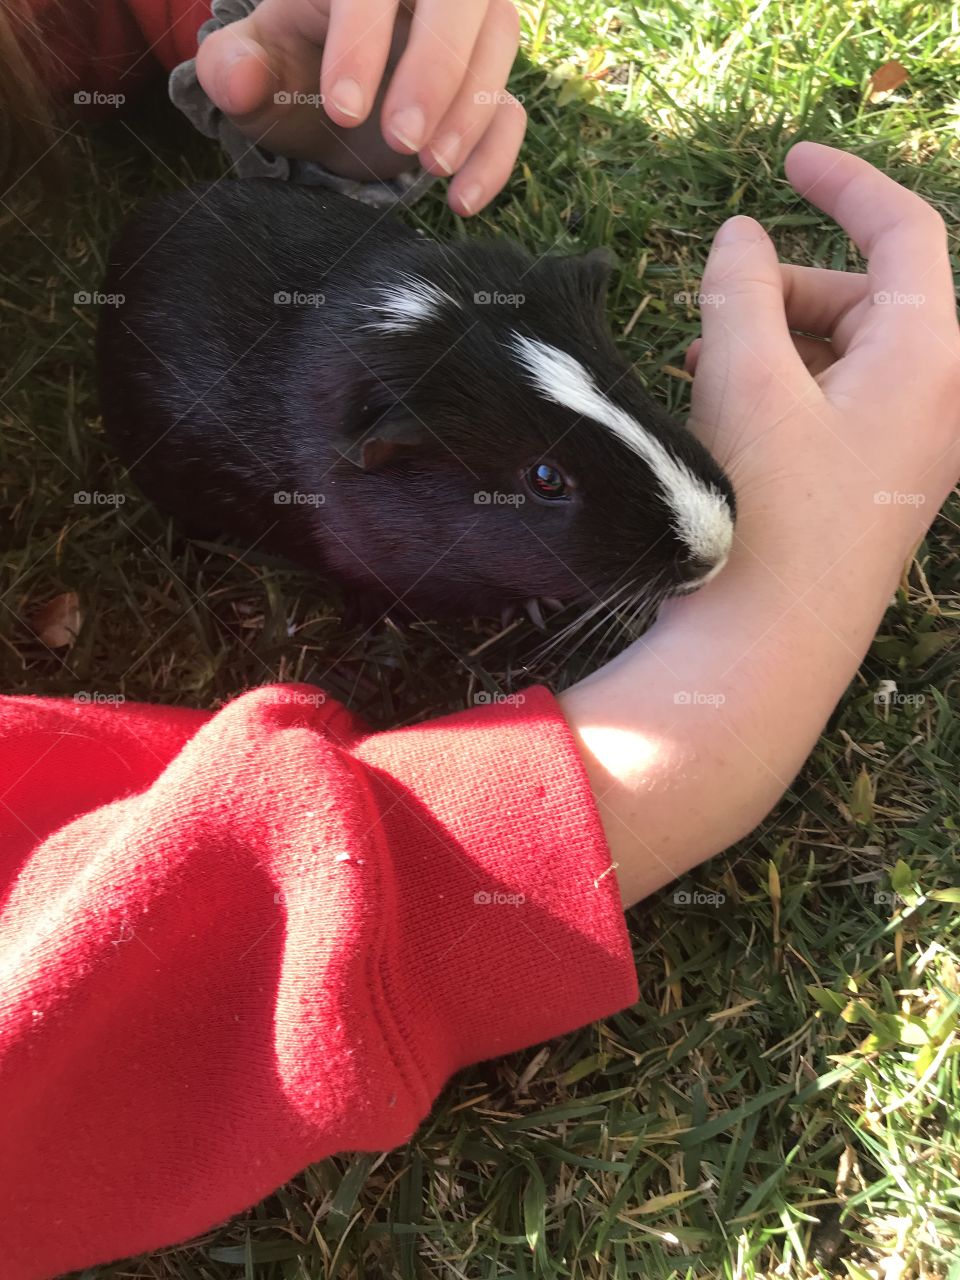 A little black and white striped furry guinea pig snuggling up in a girl’s arm outside on the green grass in nature. USA, America 